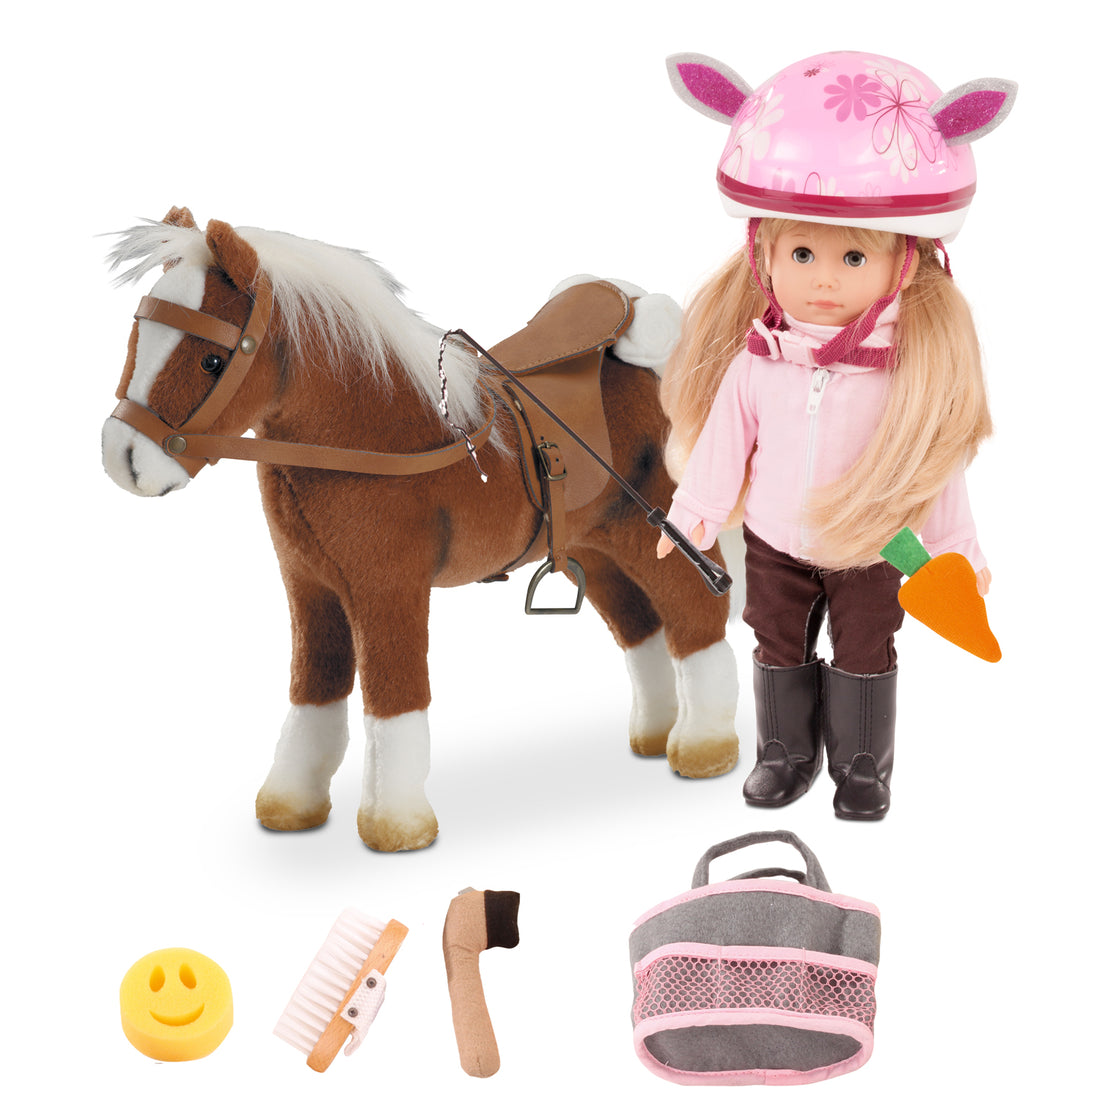 Riding fun with Fritz - Dolls and Accessories